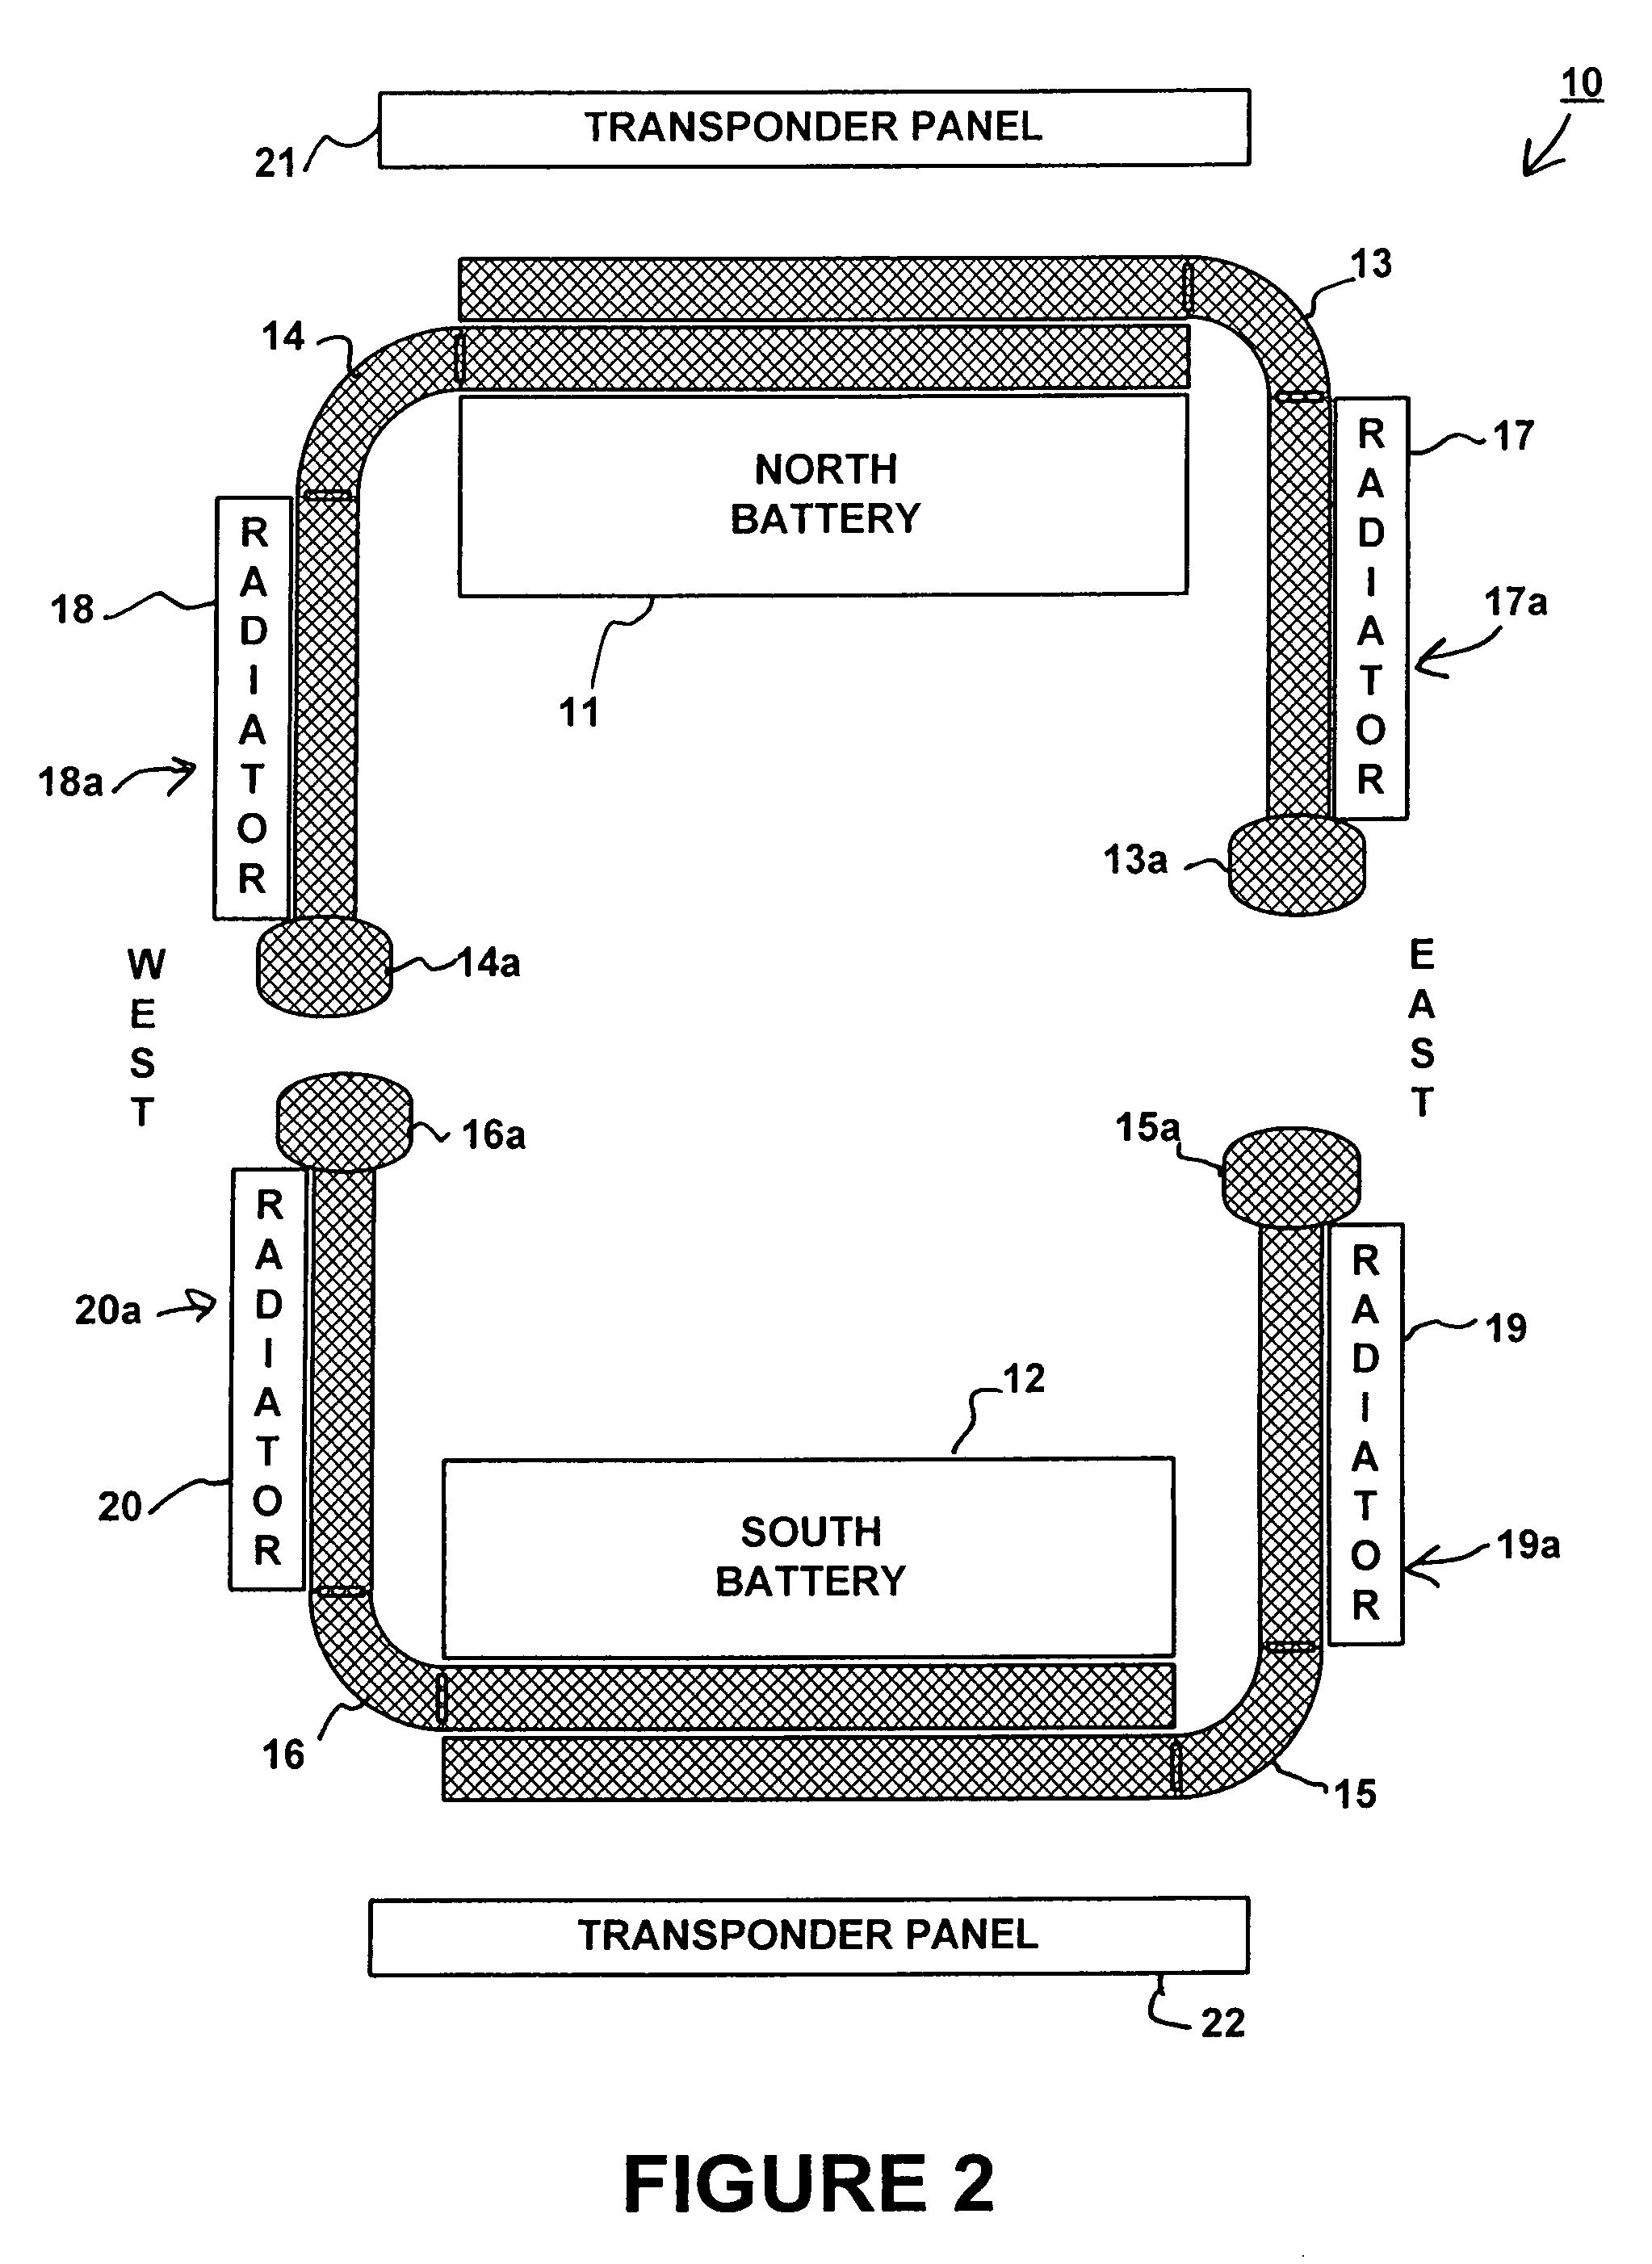 Spacecraft battery thermal management system